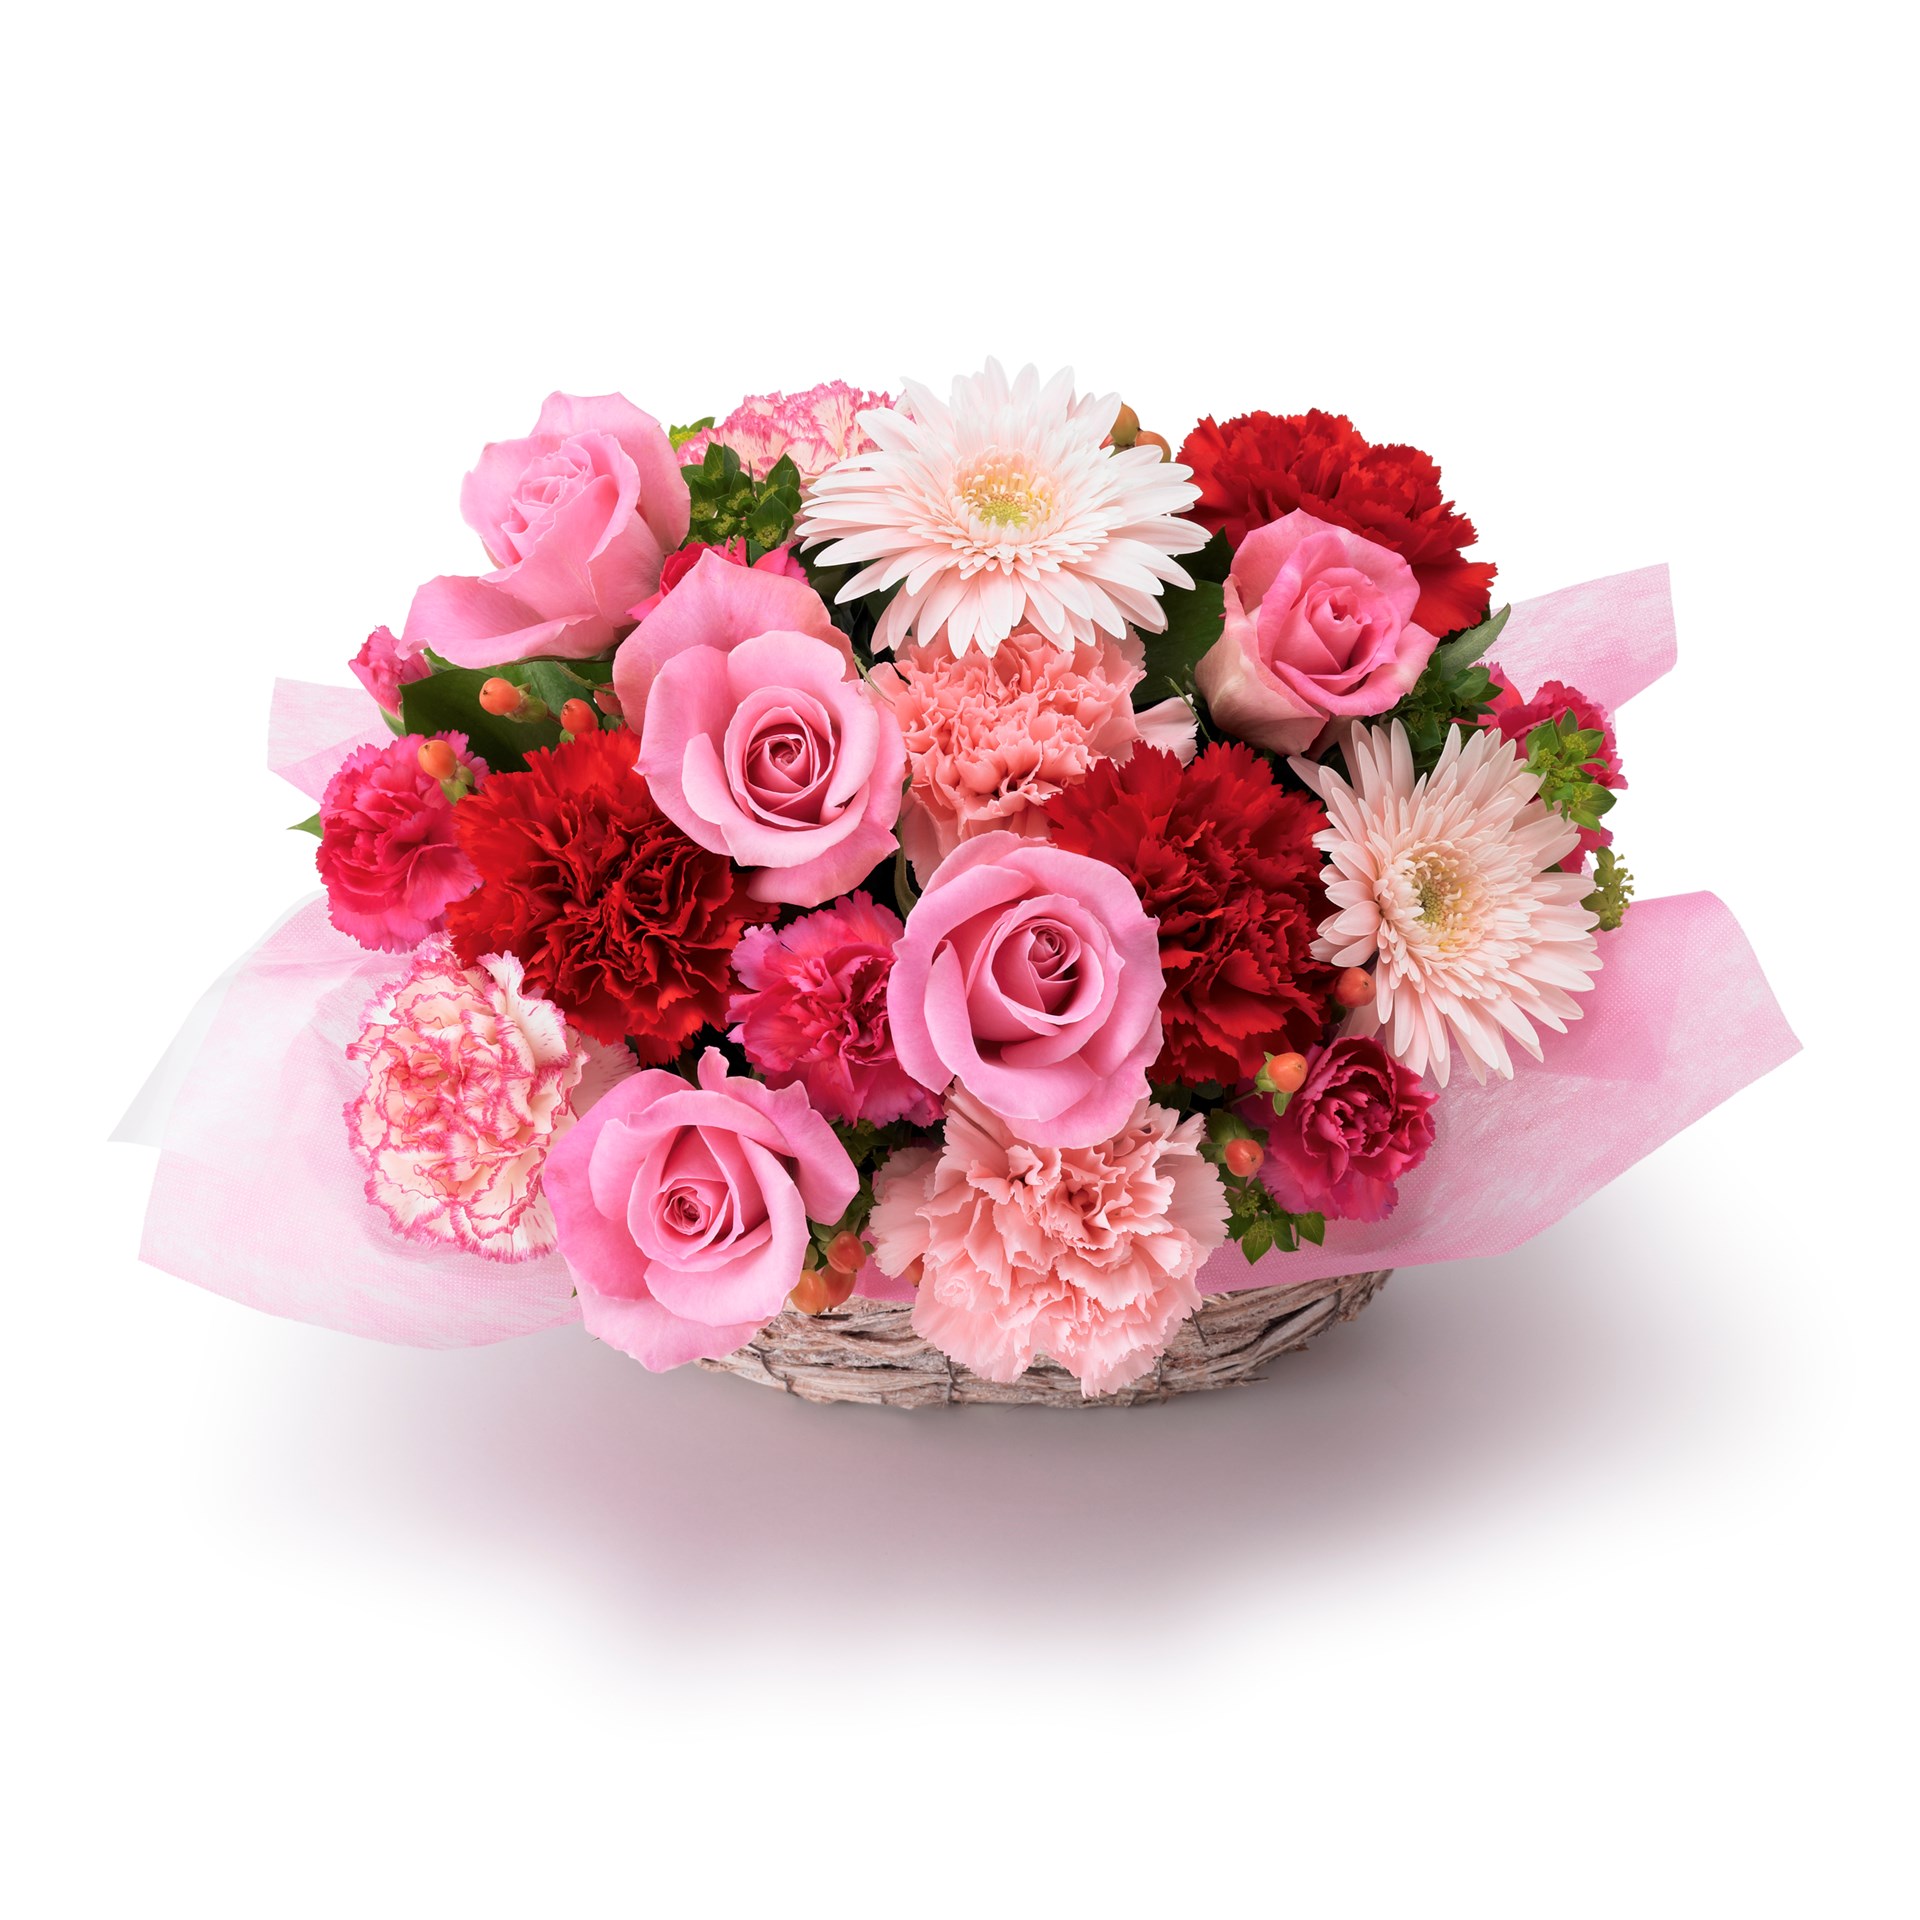 product image for Mothers Day the most popular arrangement